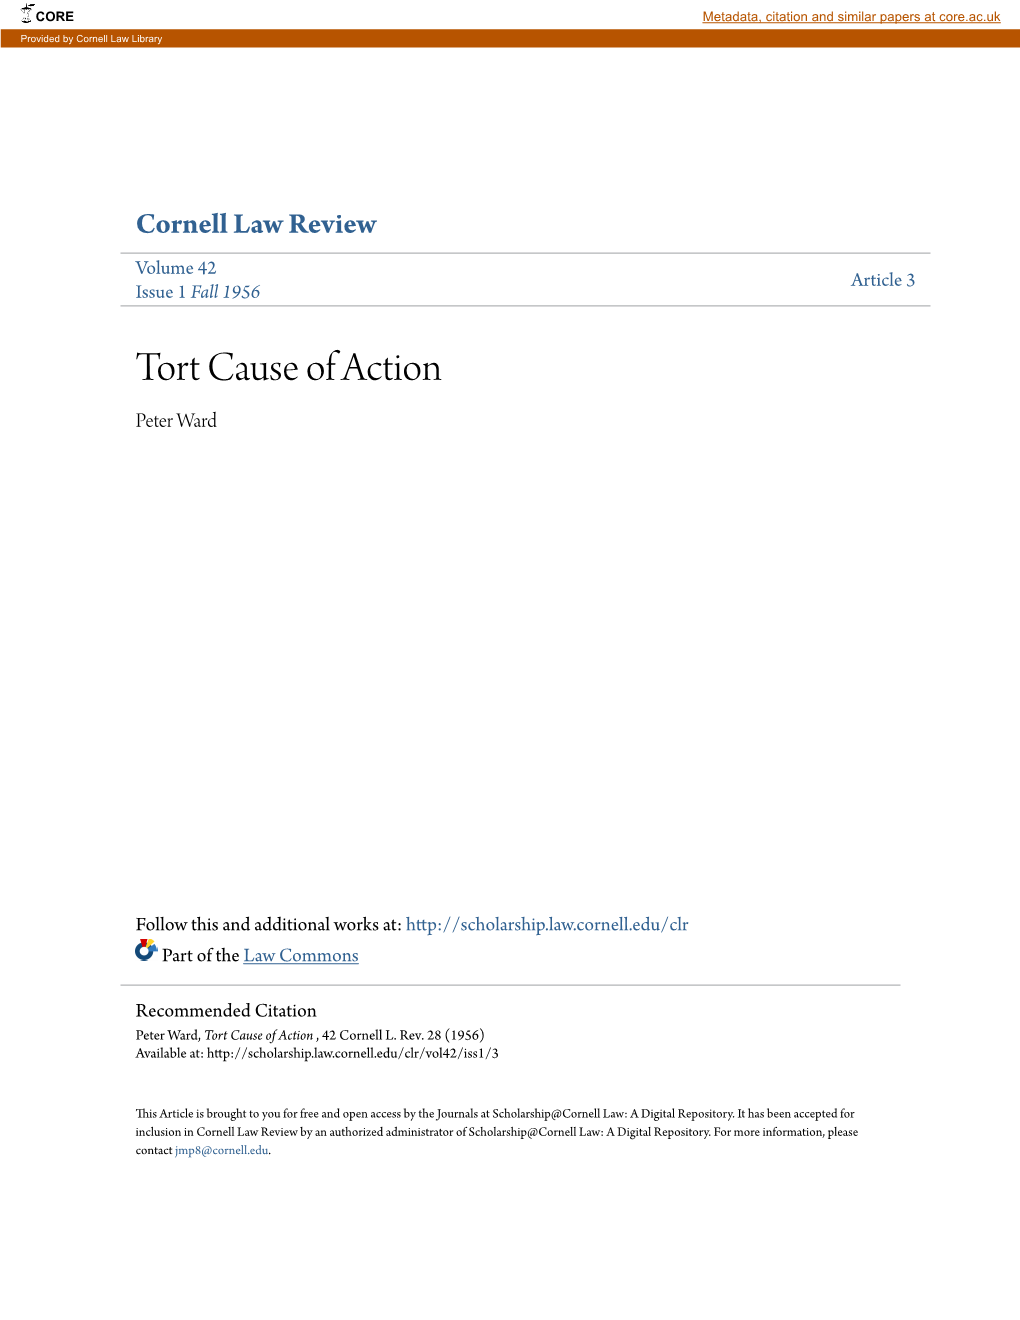 Tort Cause of Action Peter Ward